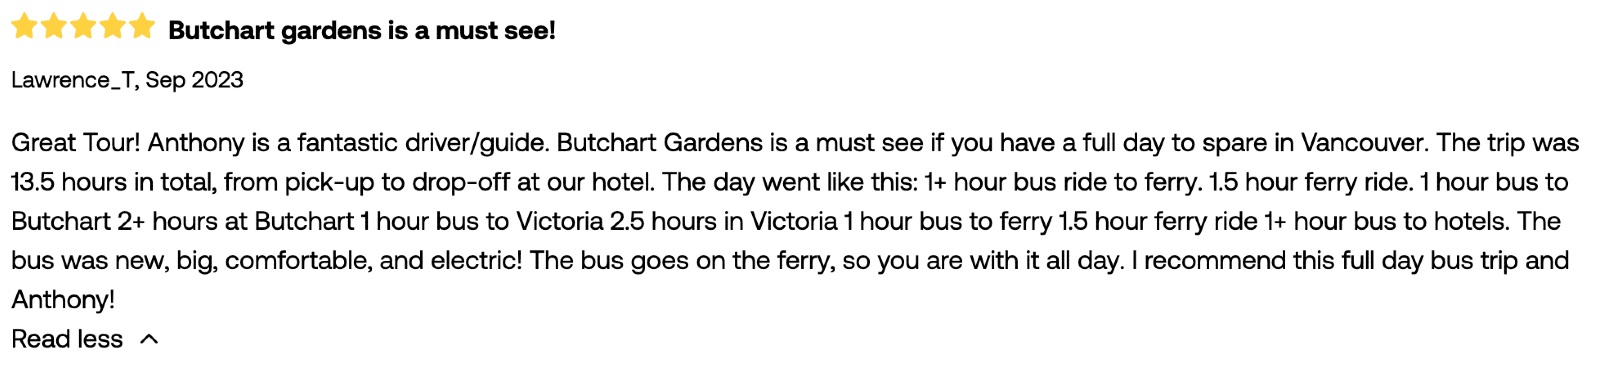 a review of a Vancouver to Butchart Gardens tour.